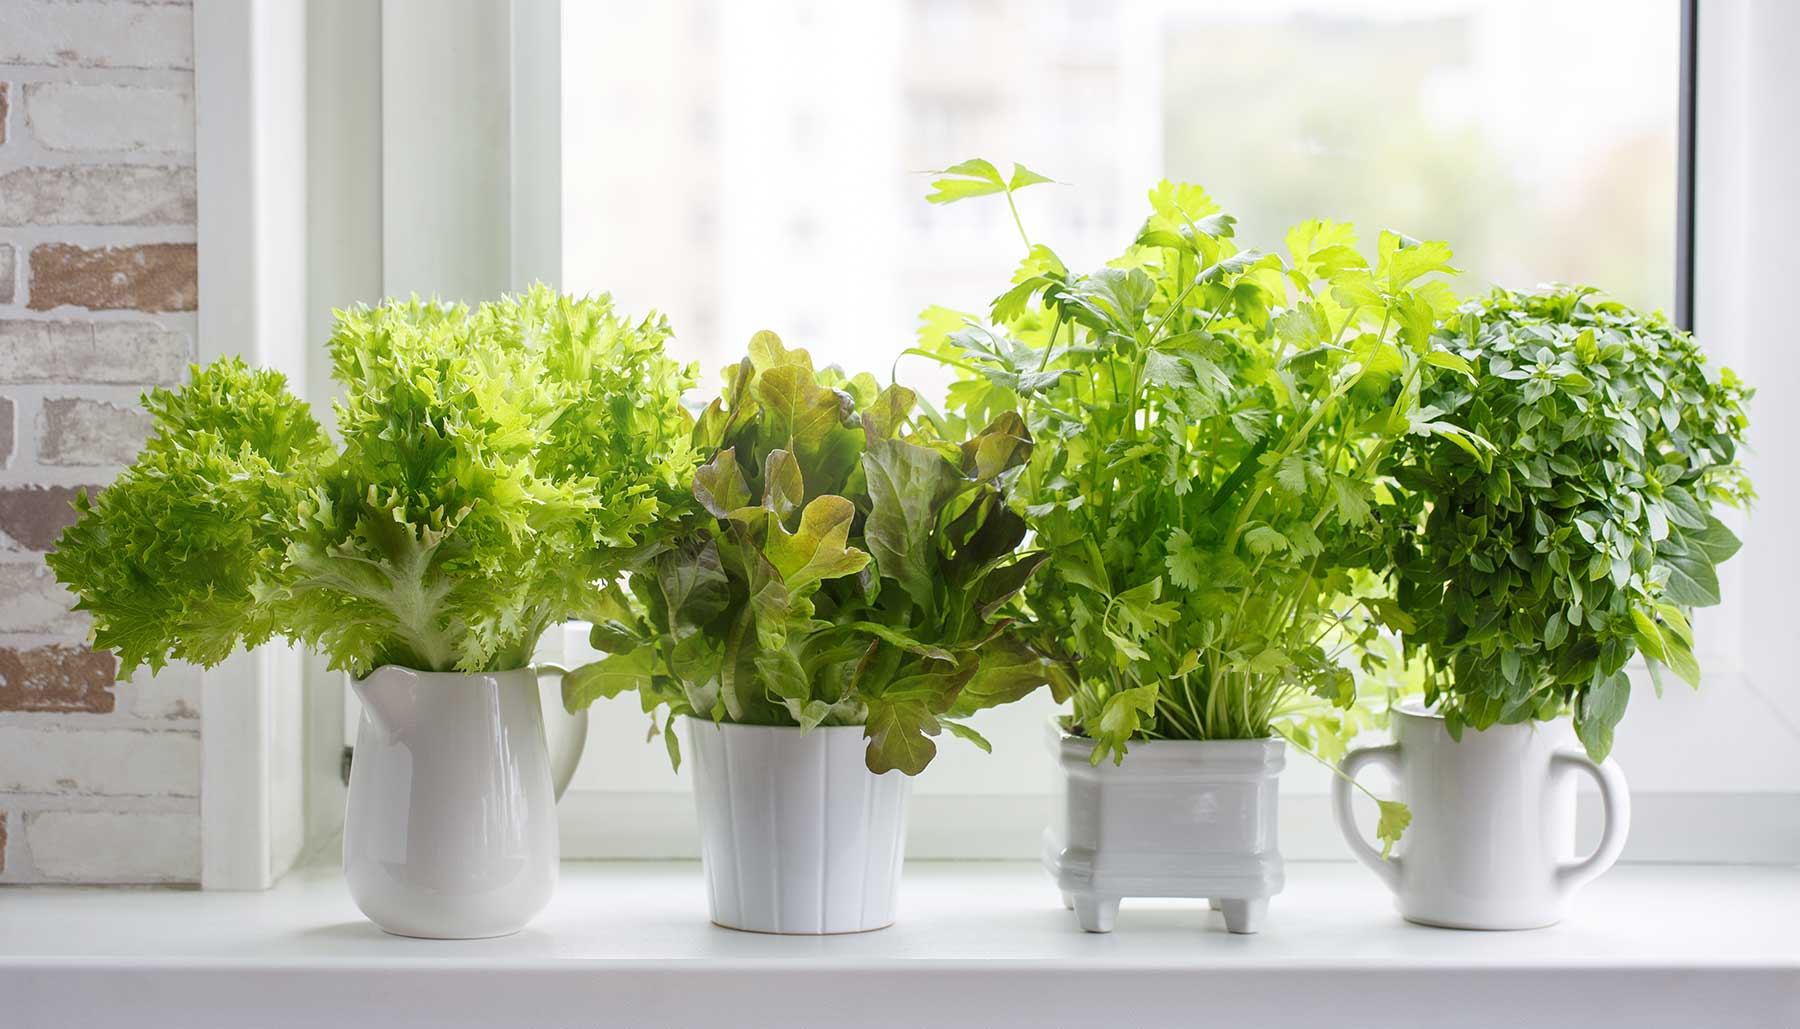 lettuce and herbs growing in containers on a window sill